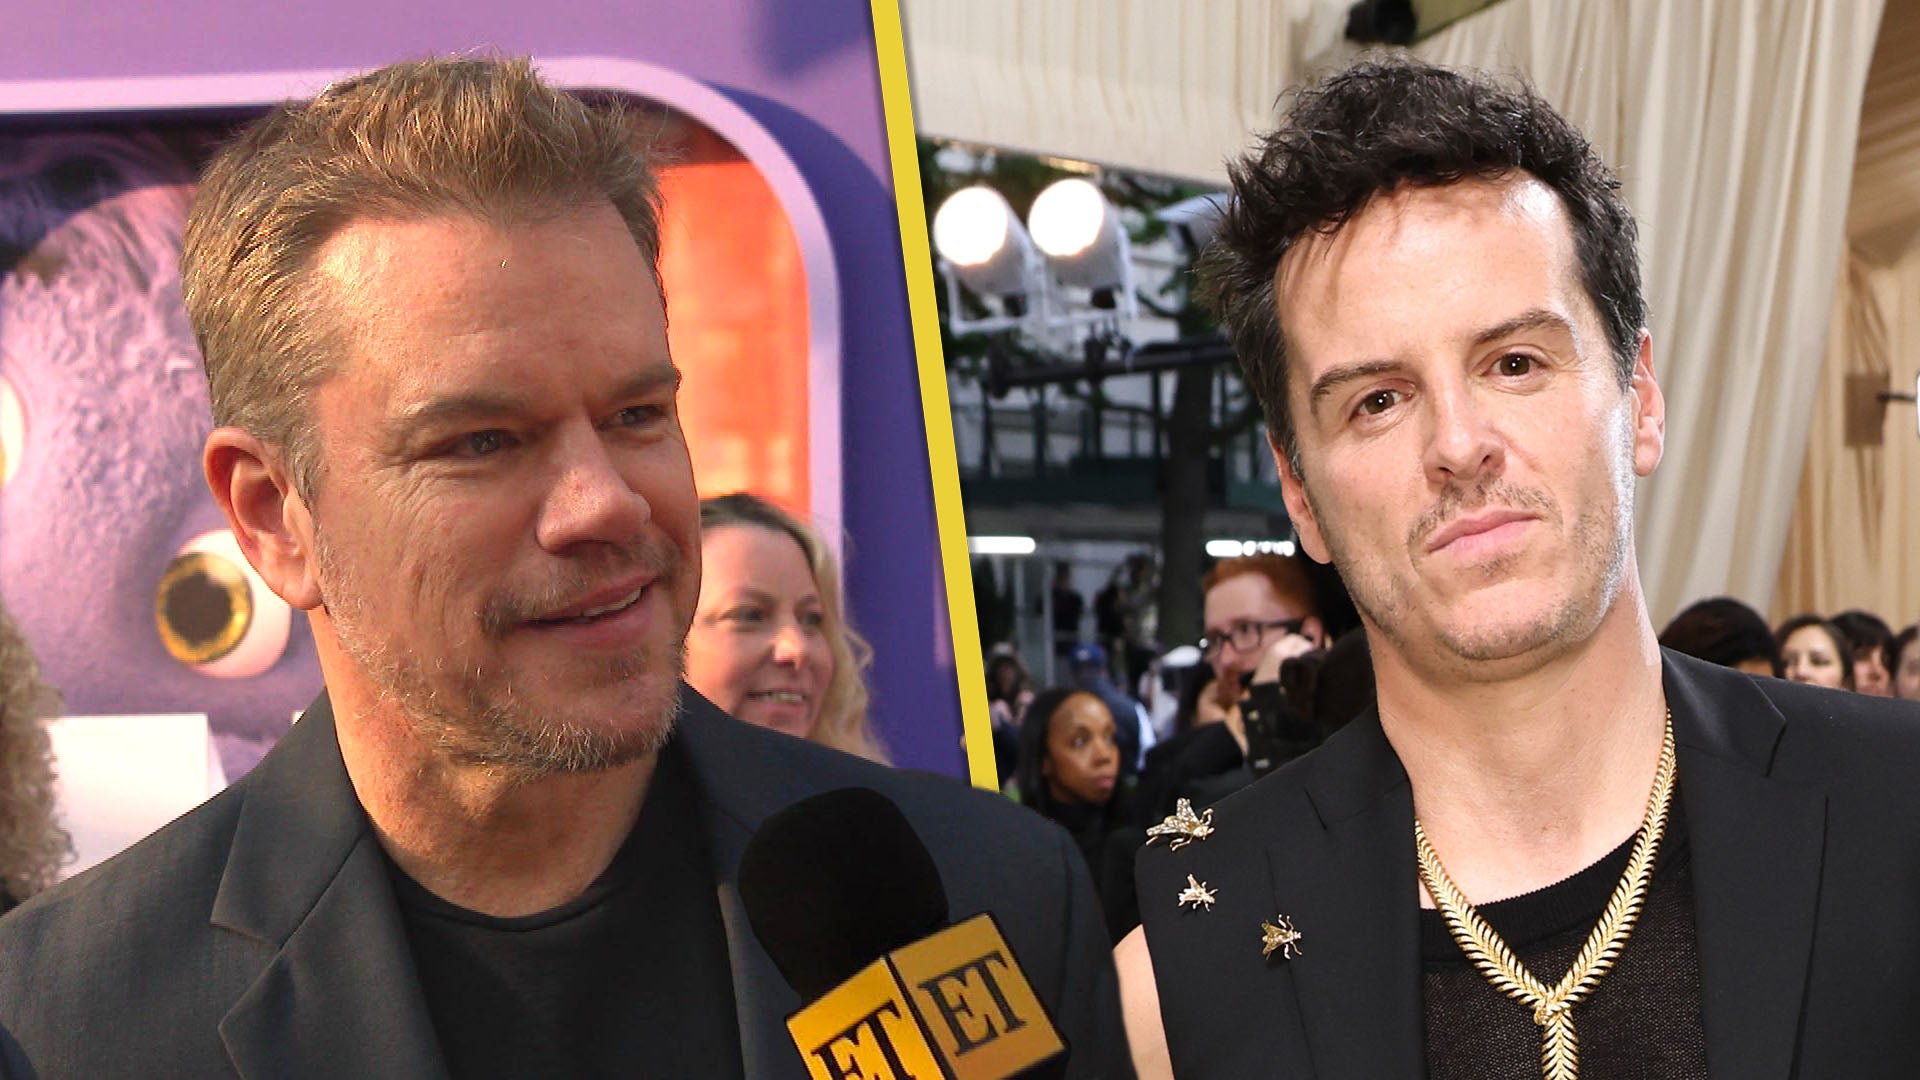 Matt Damon Reacts to 'Ripley' Run-In With Andrew Scott at the Met Gala (Exclusive)